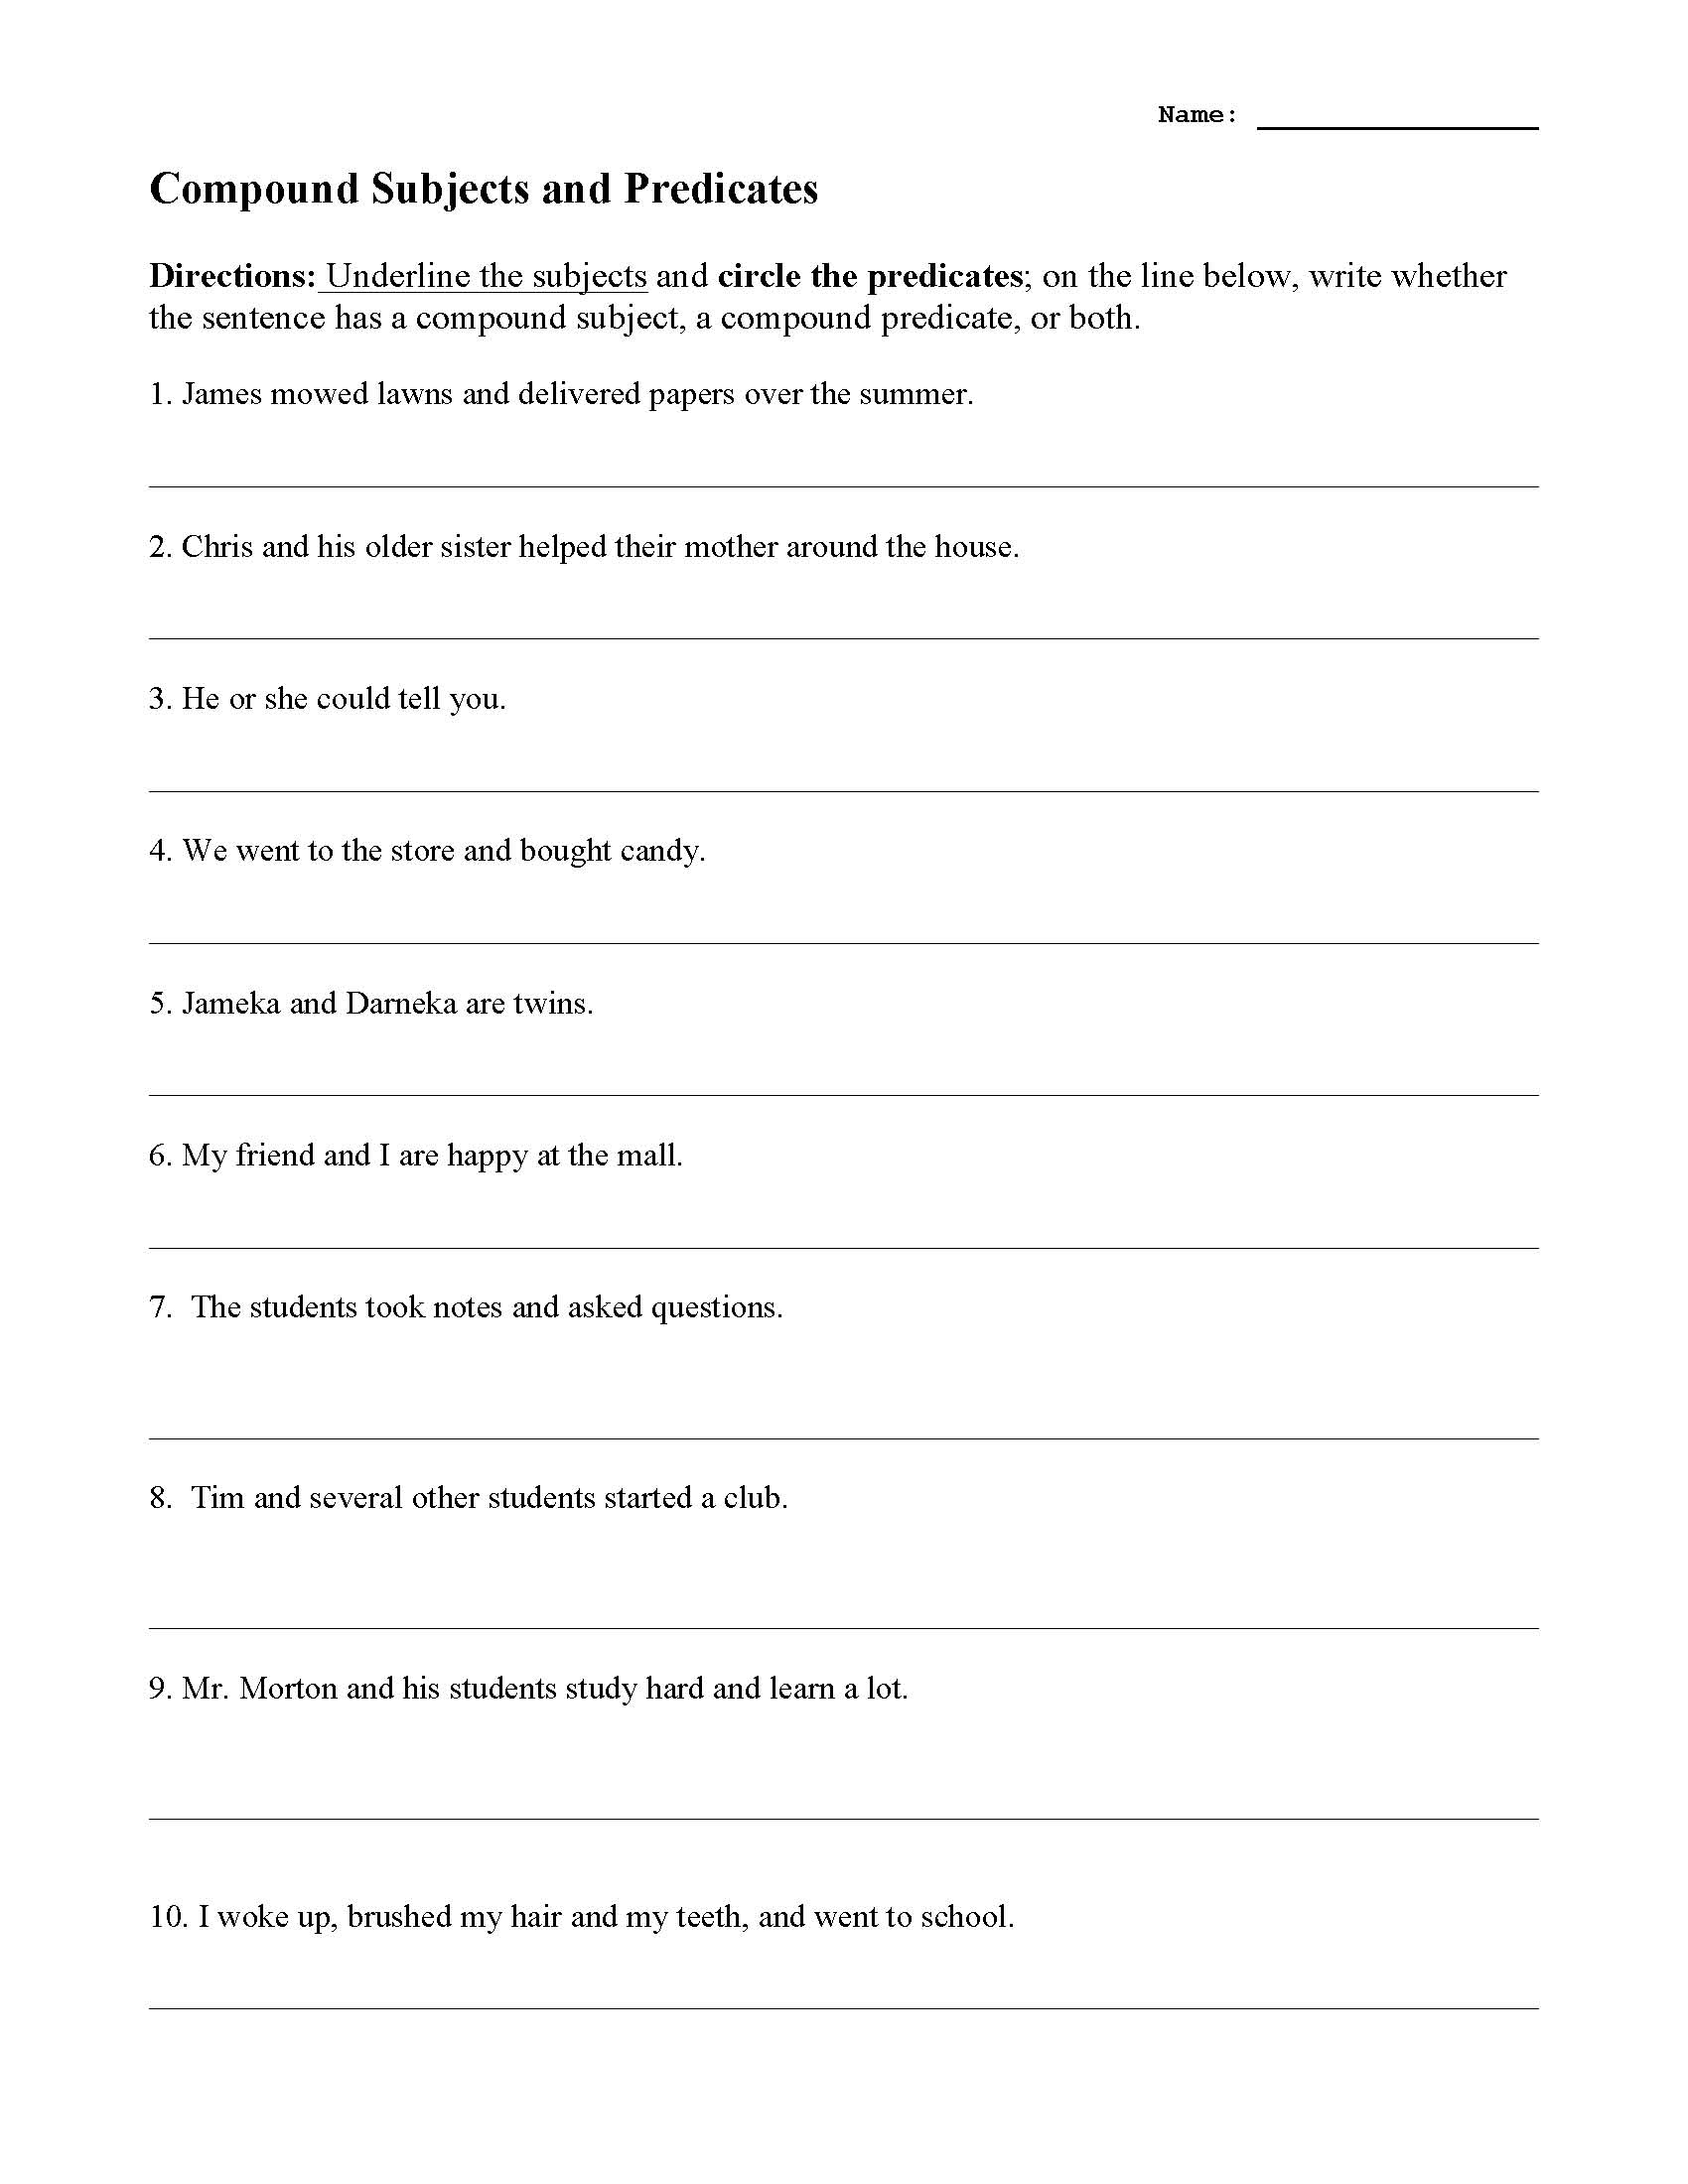 Subjects And Predicates Worksheets K5 Learning Subject And Predicate Vocabulary Worksheet